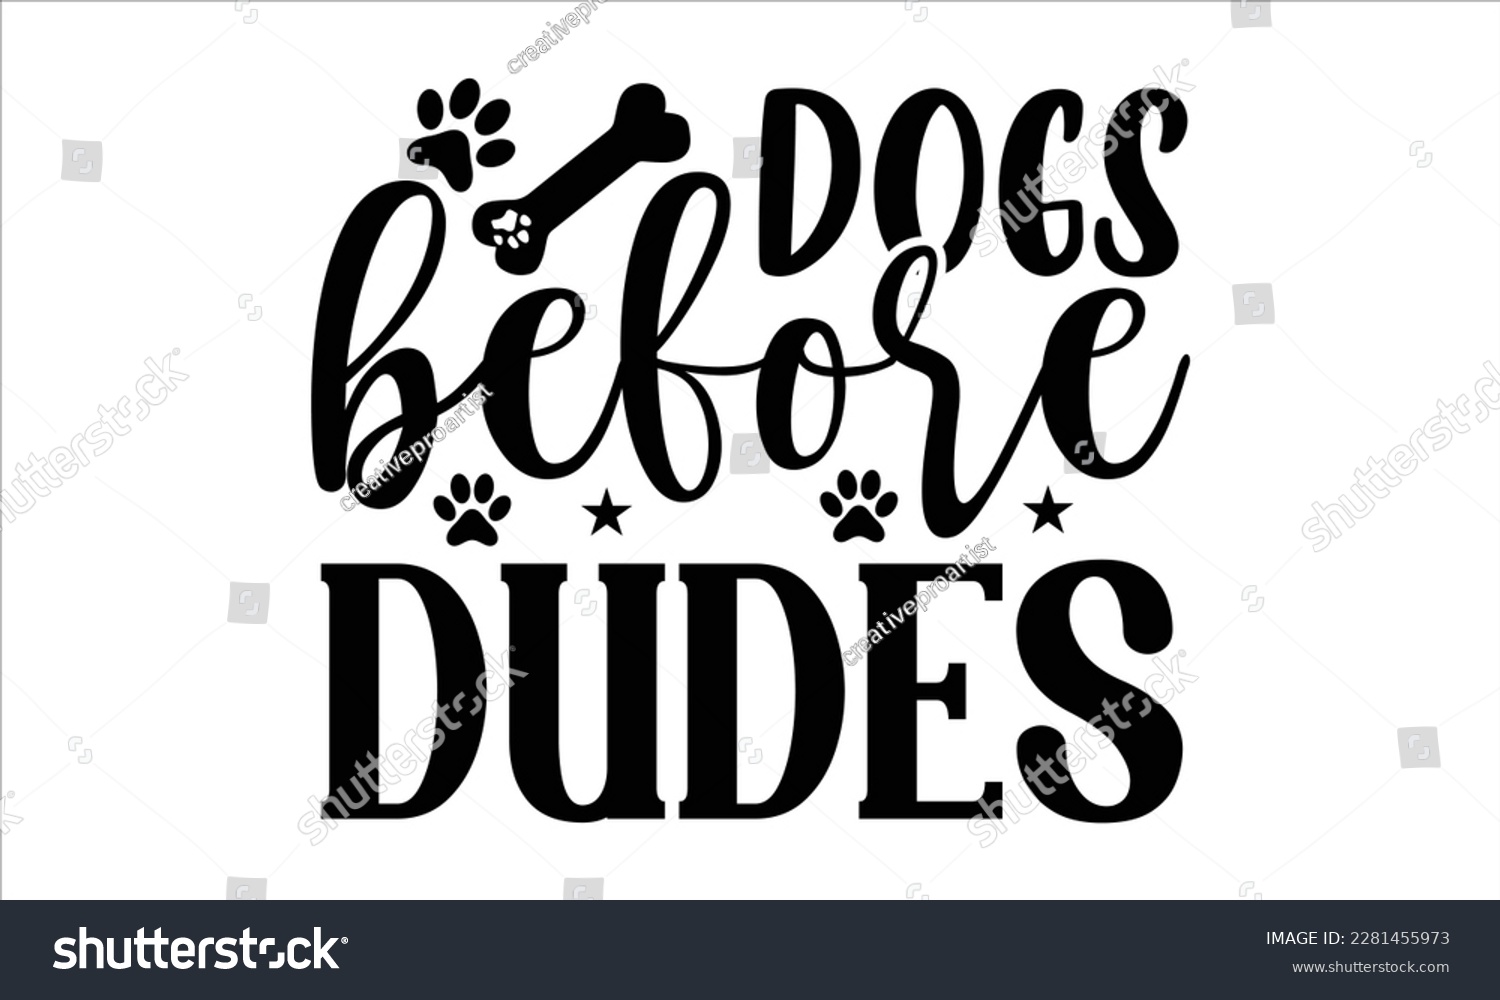 SVG of Dogs before dudes- Boxer Dog T- shirt design, Hand drawn lettering phrase, for Cutting Machine, Silhouette Cameo, Cricut eps, svg Files for Cutting, EPS 10 svg